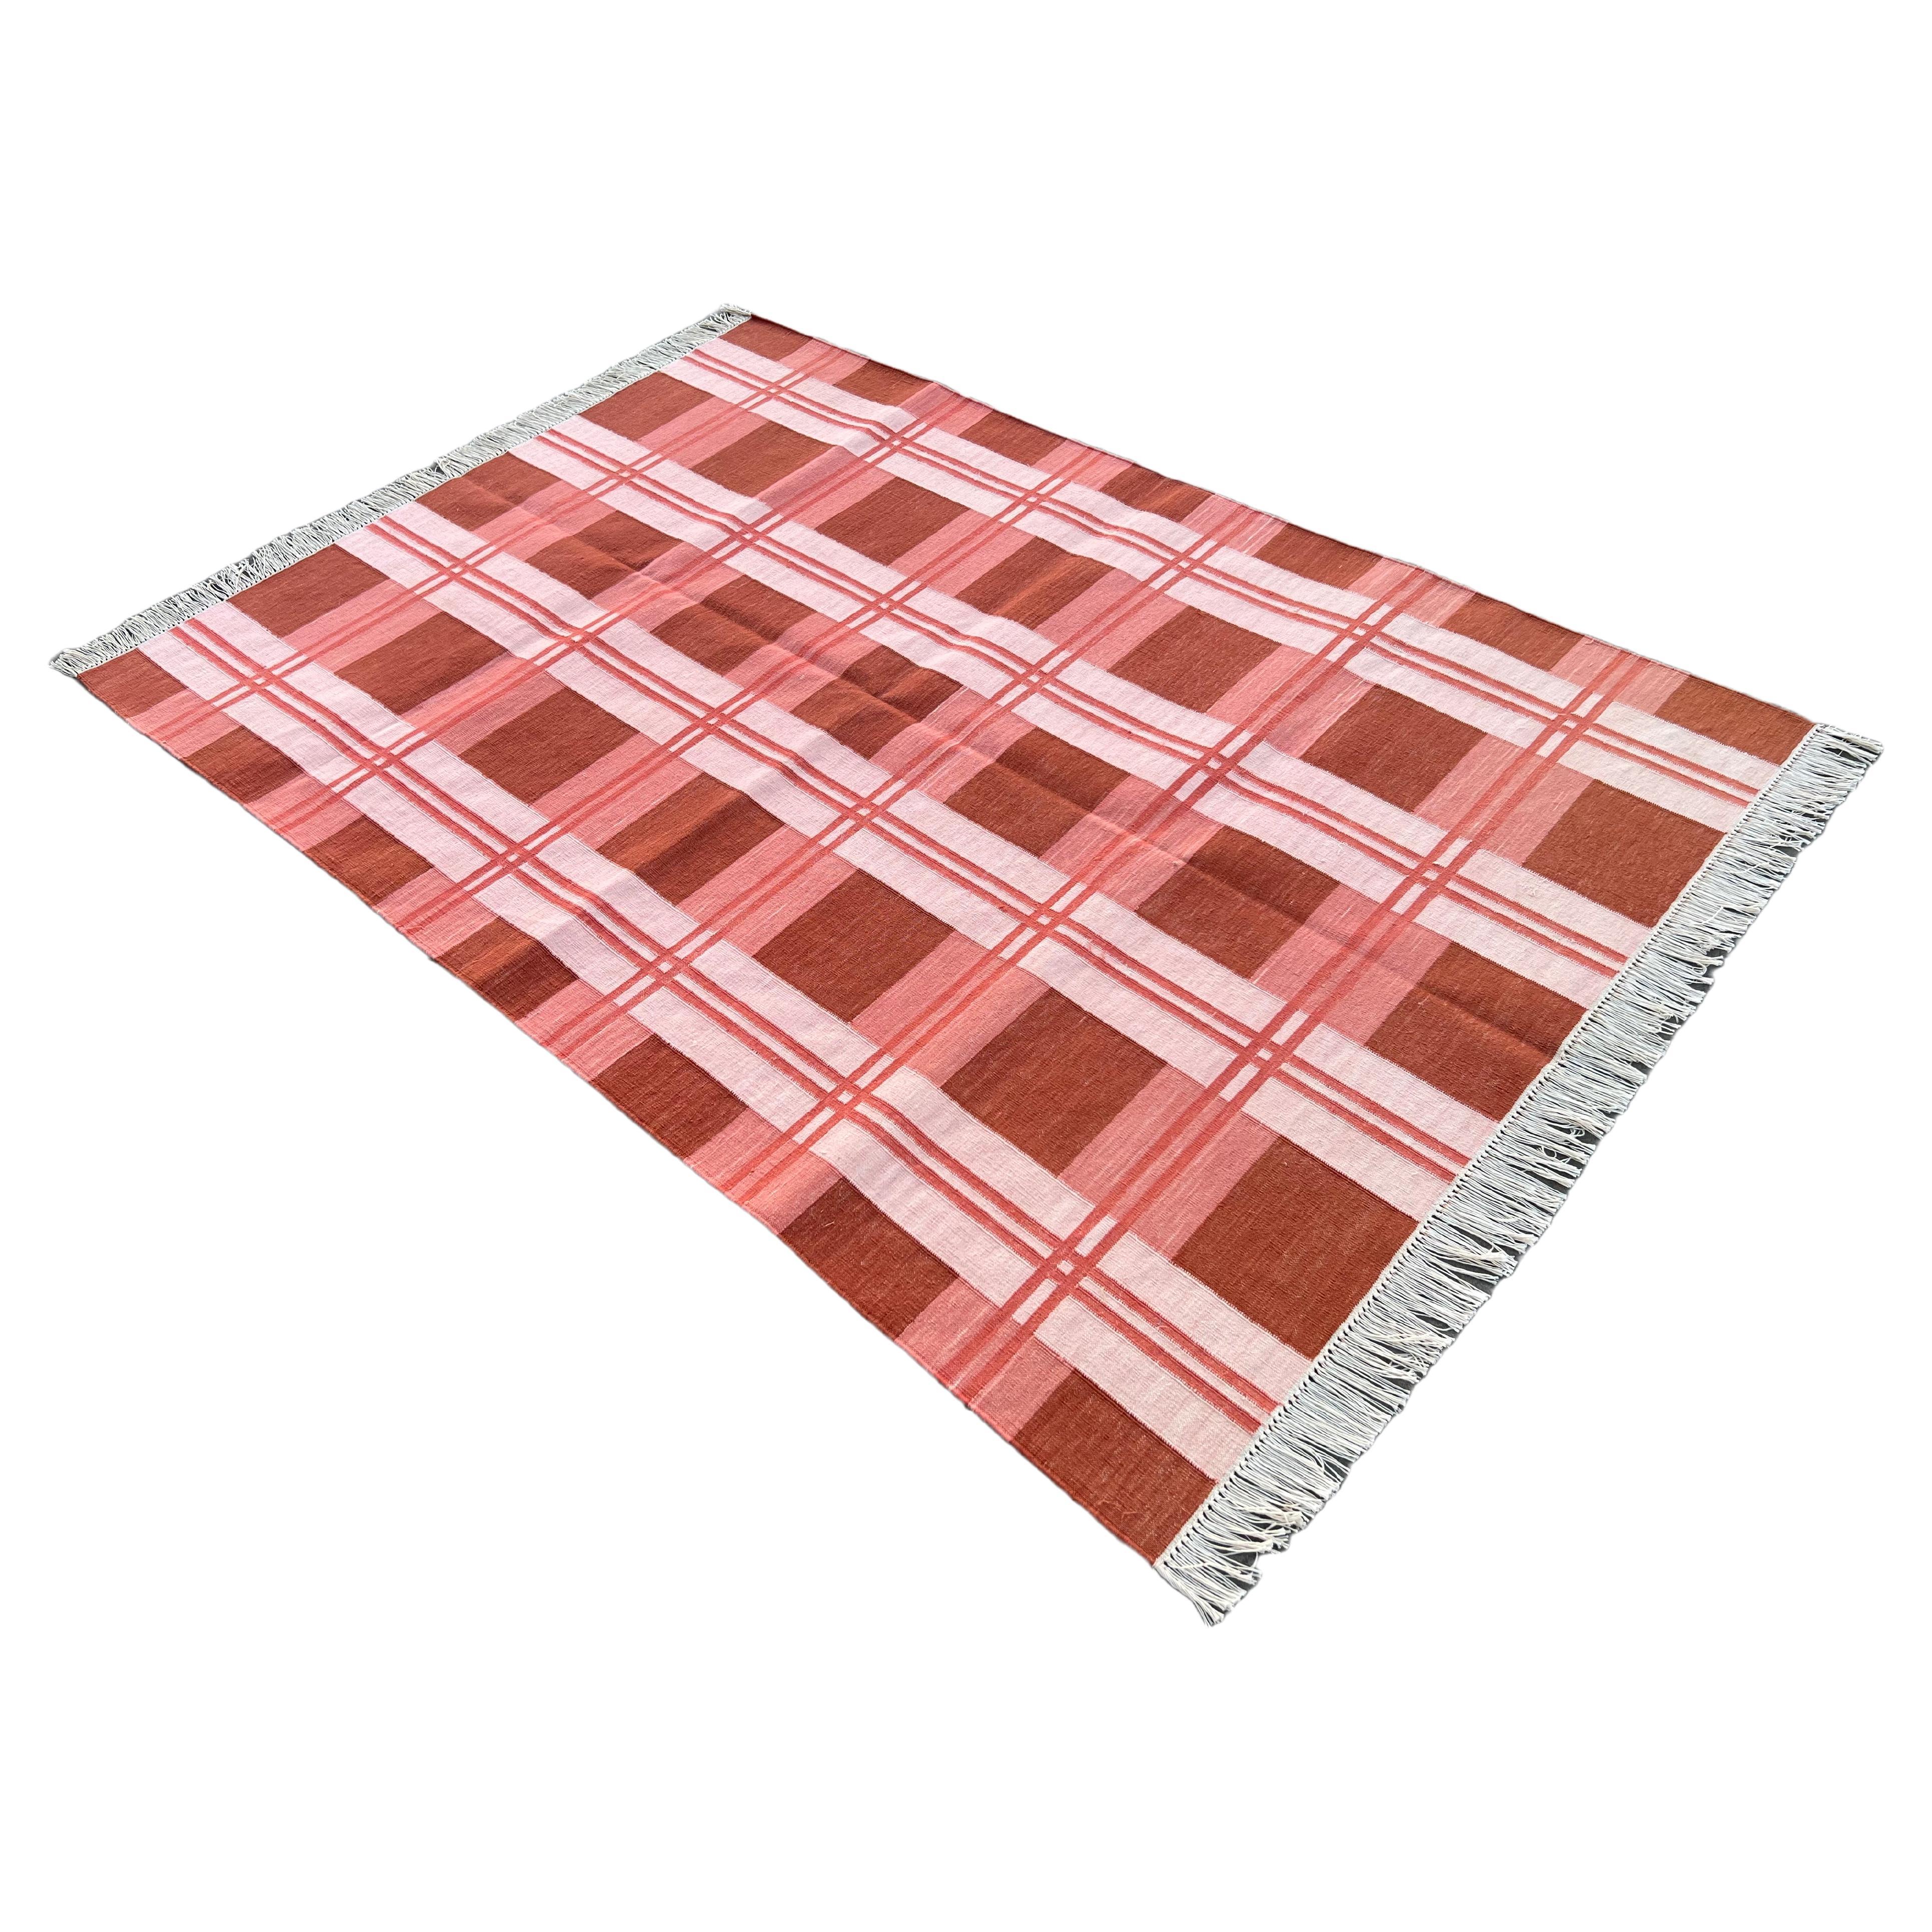 Handmade Cotton Area Flat Weave Rug, 4x6 Red And Pink Checked Indian Dhurrie Rug